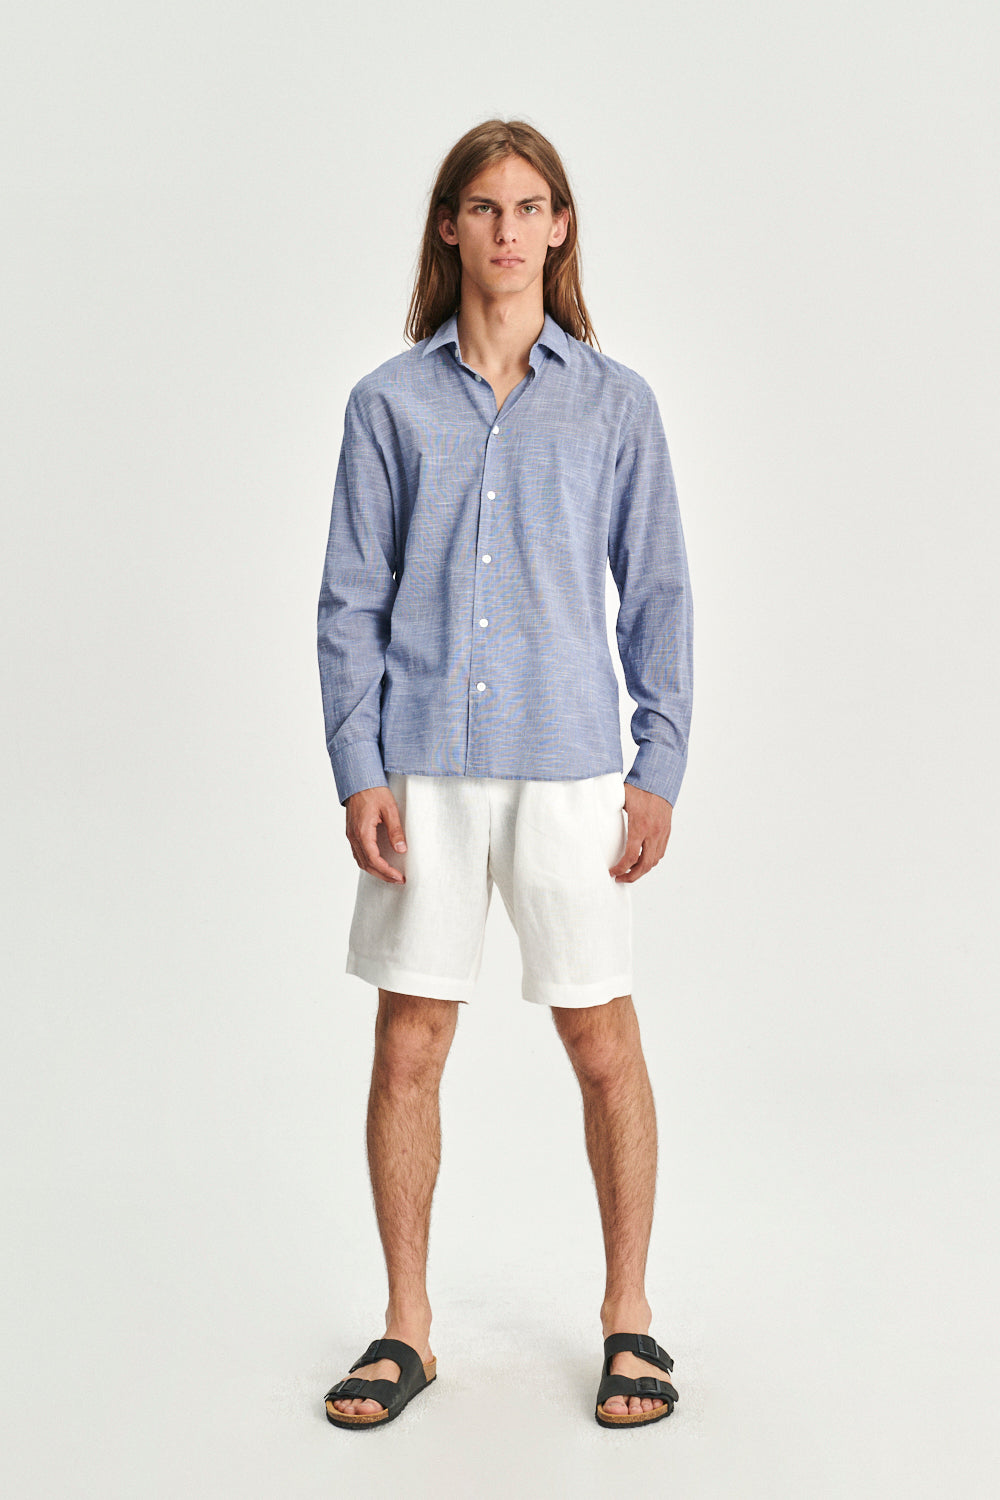 Feel Good Shirt in the Finest Airy Italian Cotton